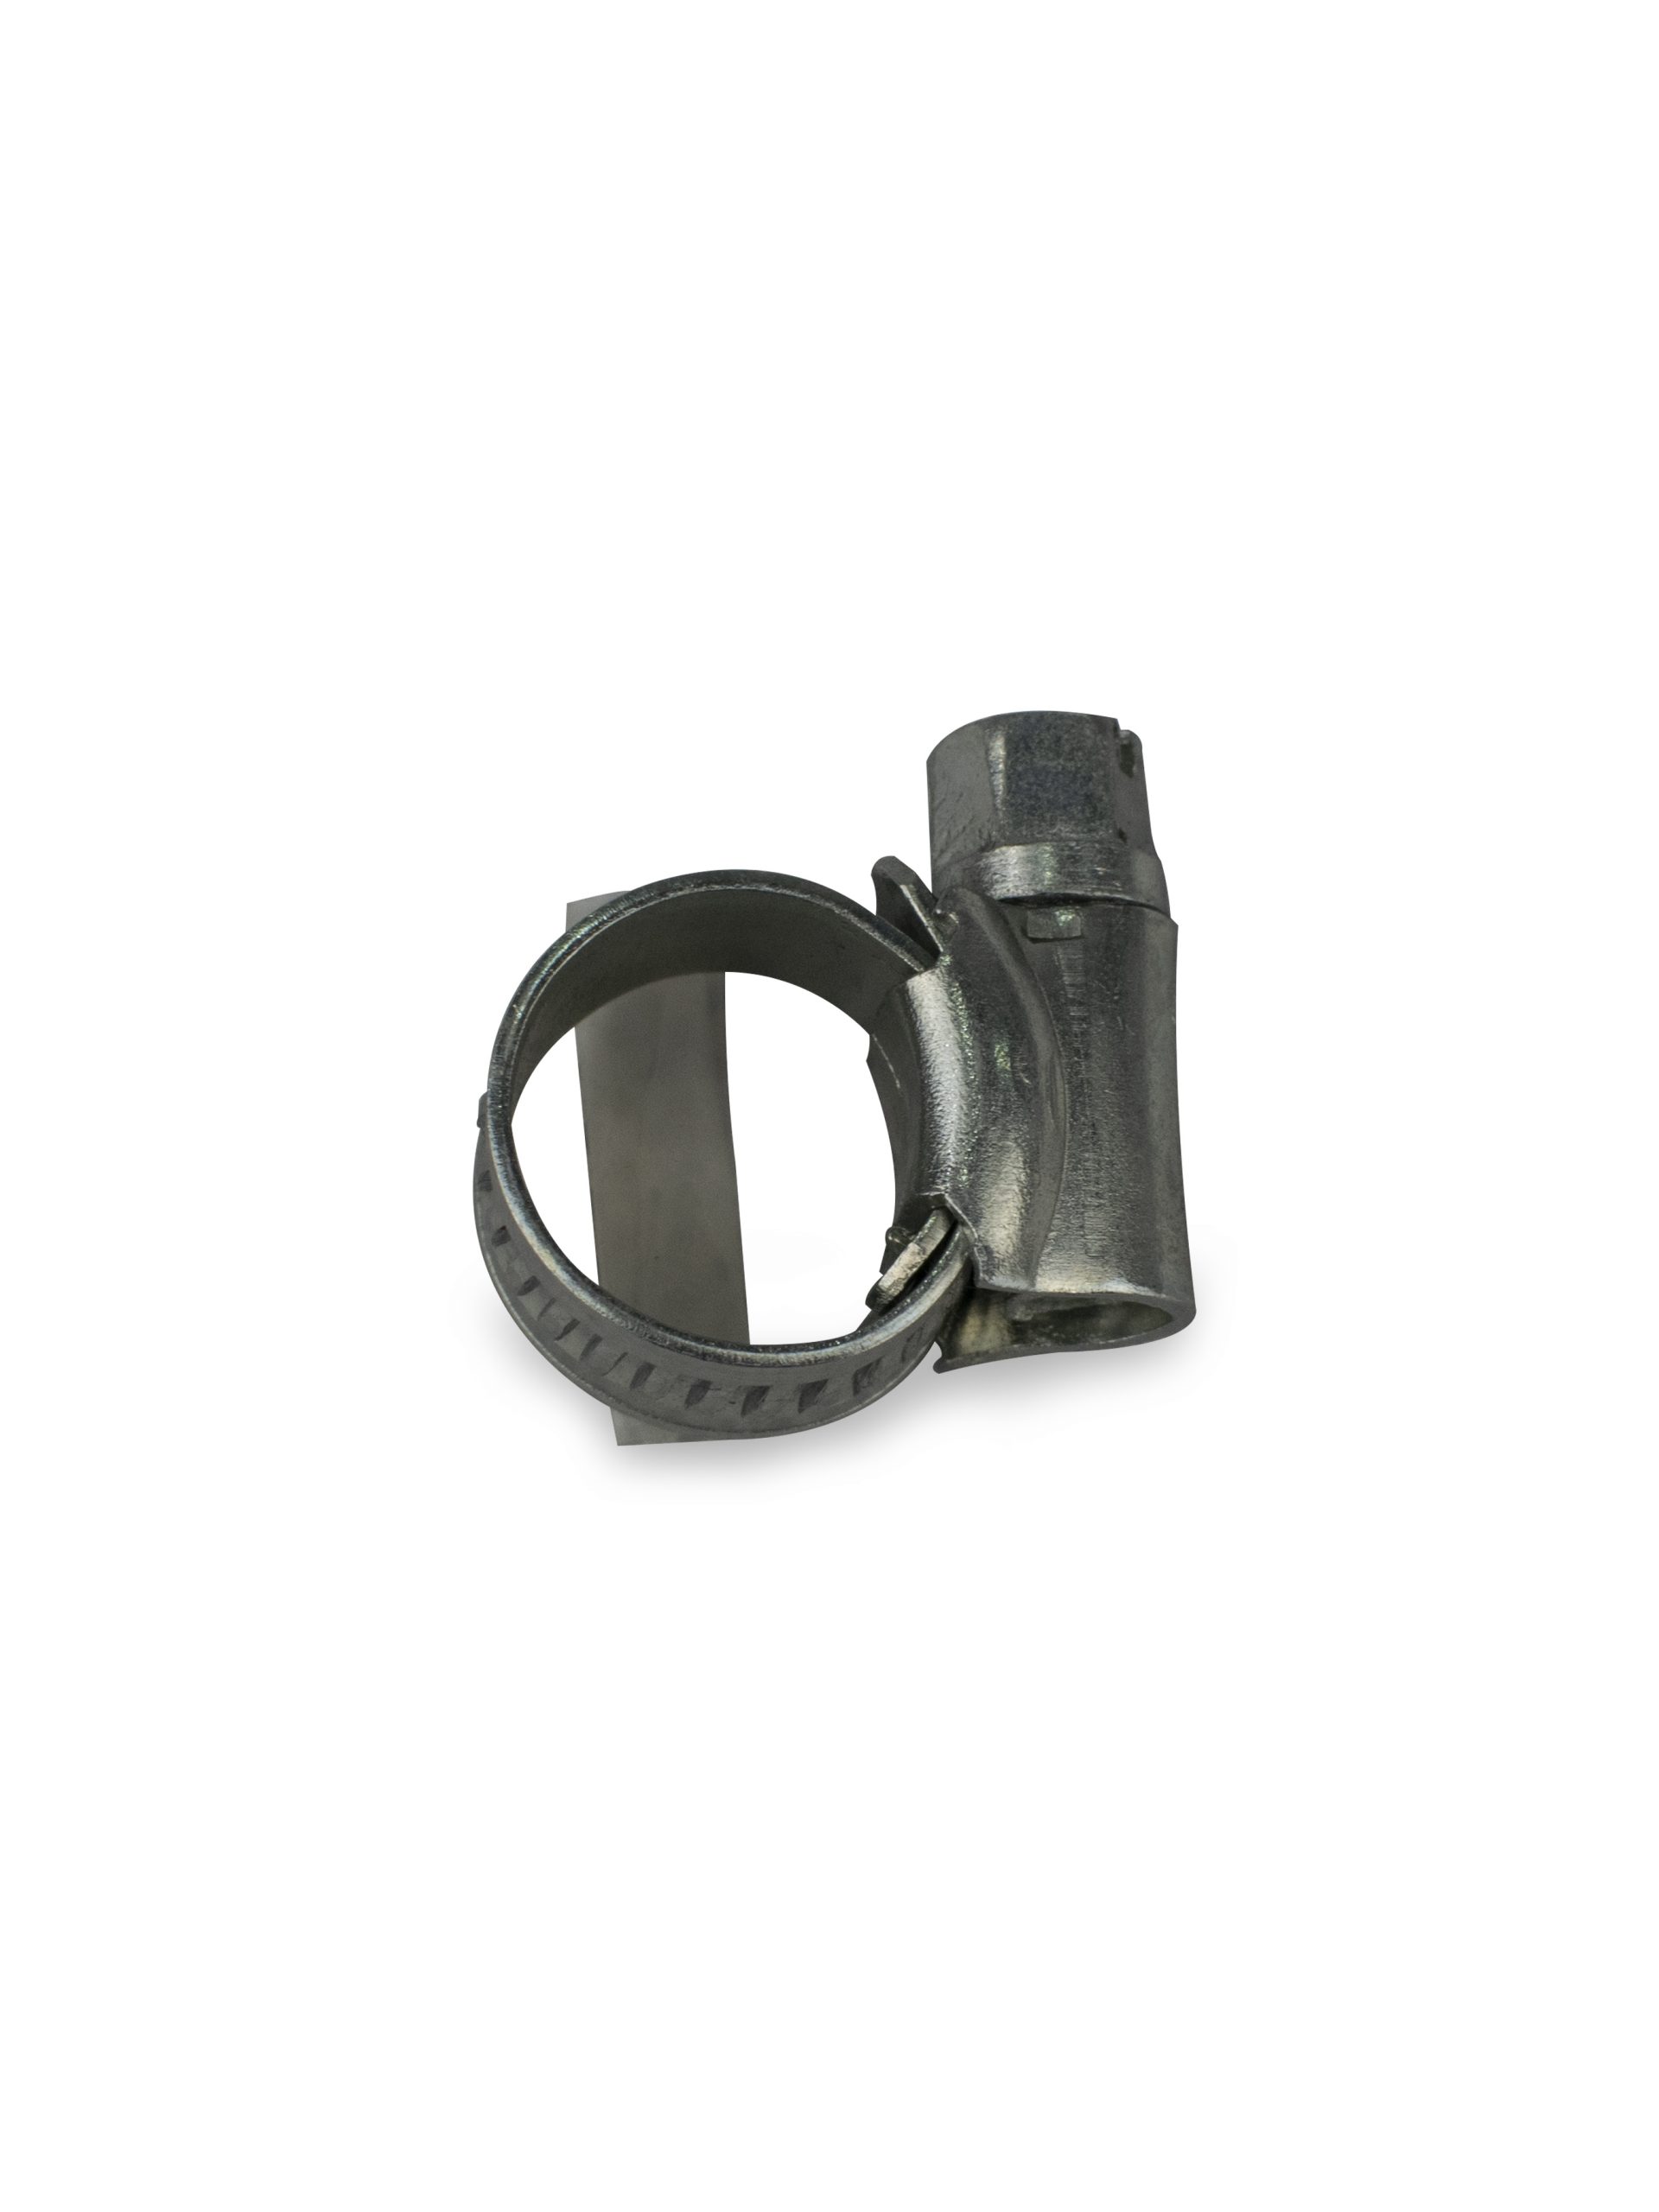 JUBILEE CLIP  9.5-12MM  OR  3/8 Inches - 1/2 Inches from Gas Equipment Company Llc Abu Dhabi, UNITED ARAB EMIRATES